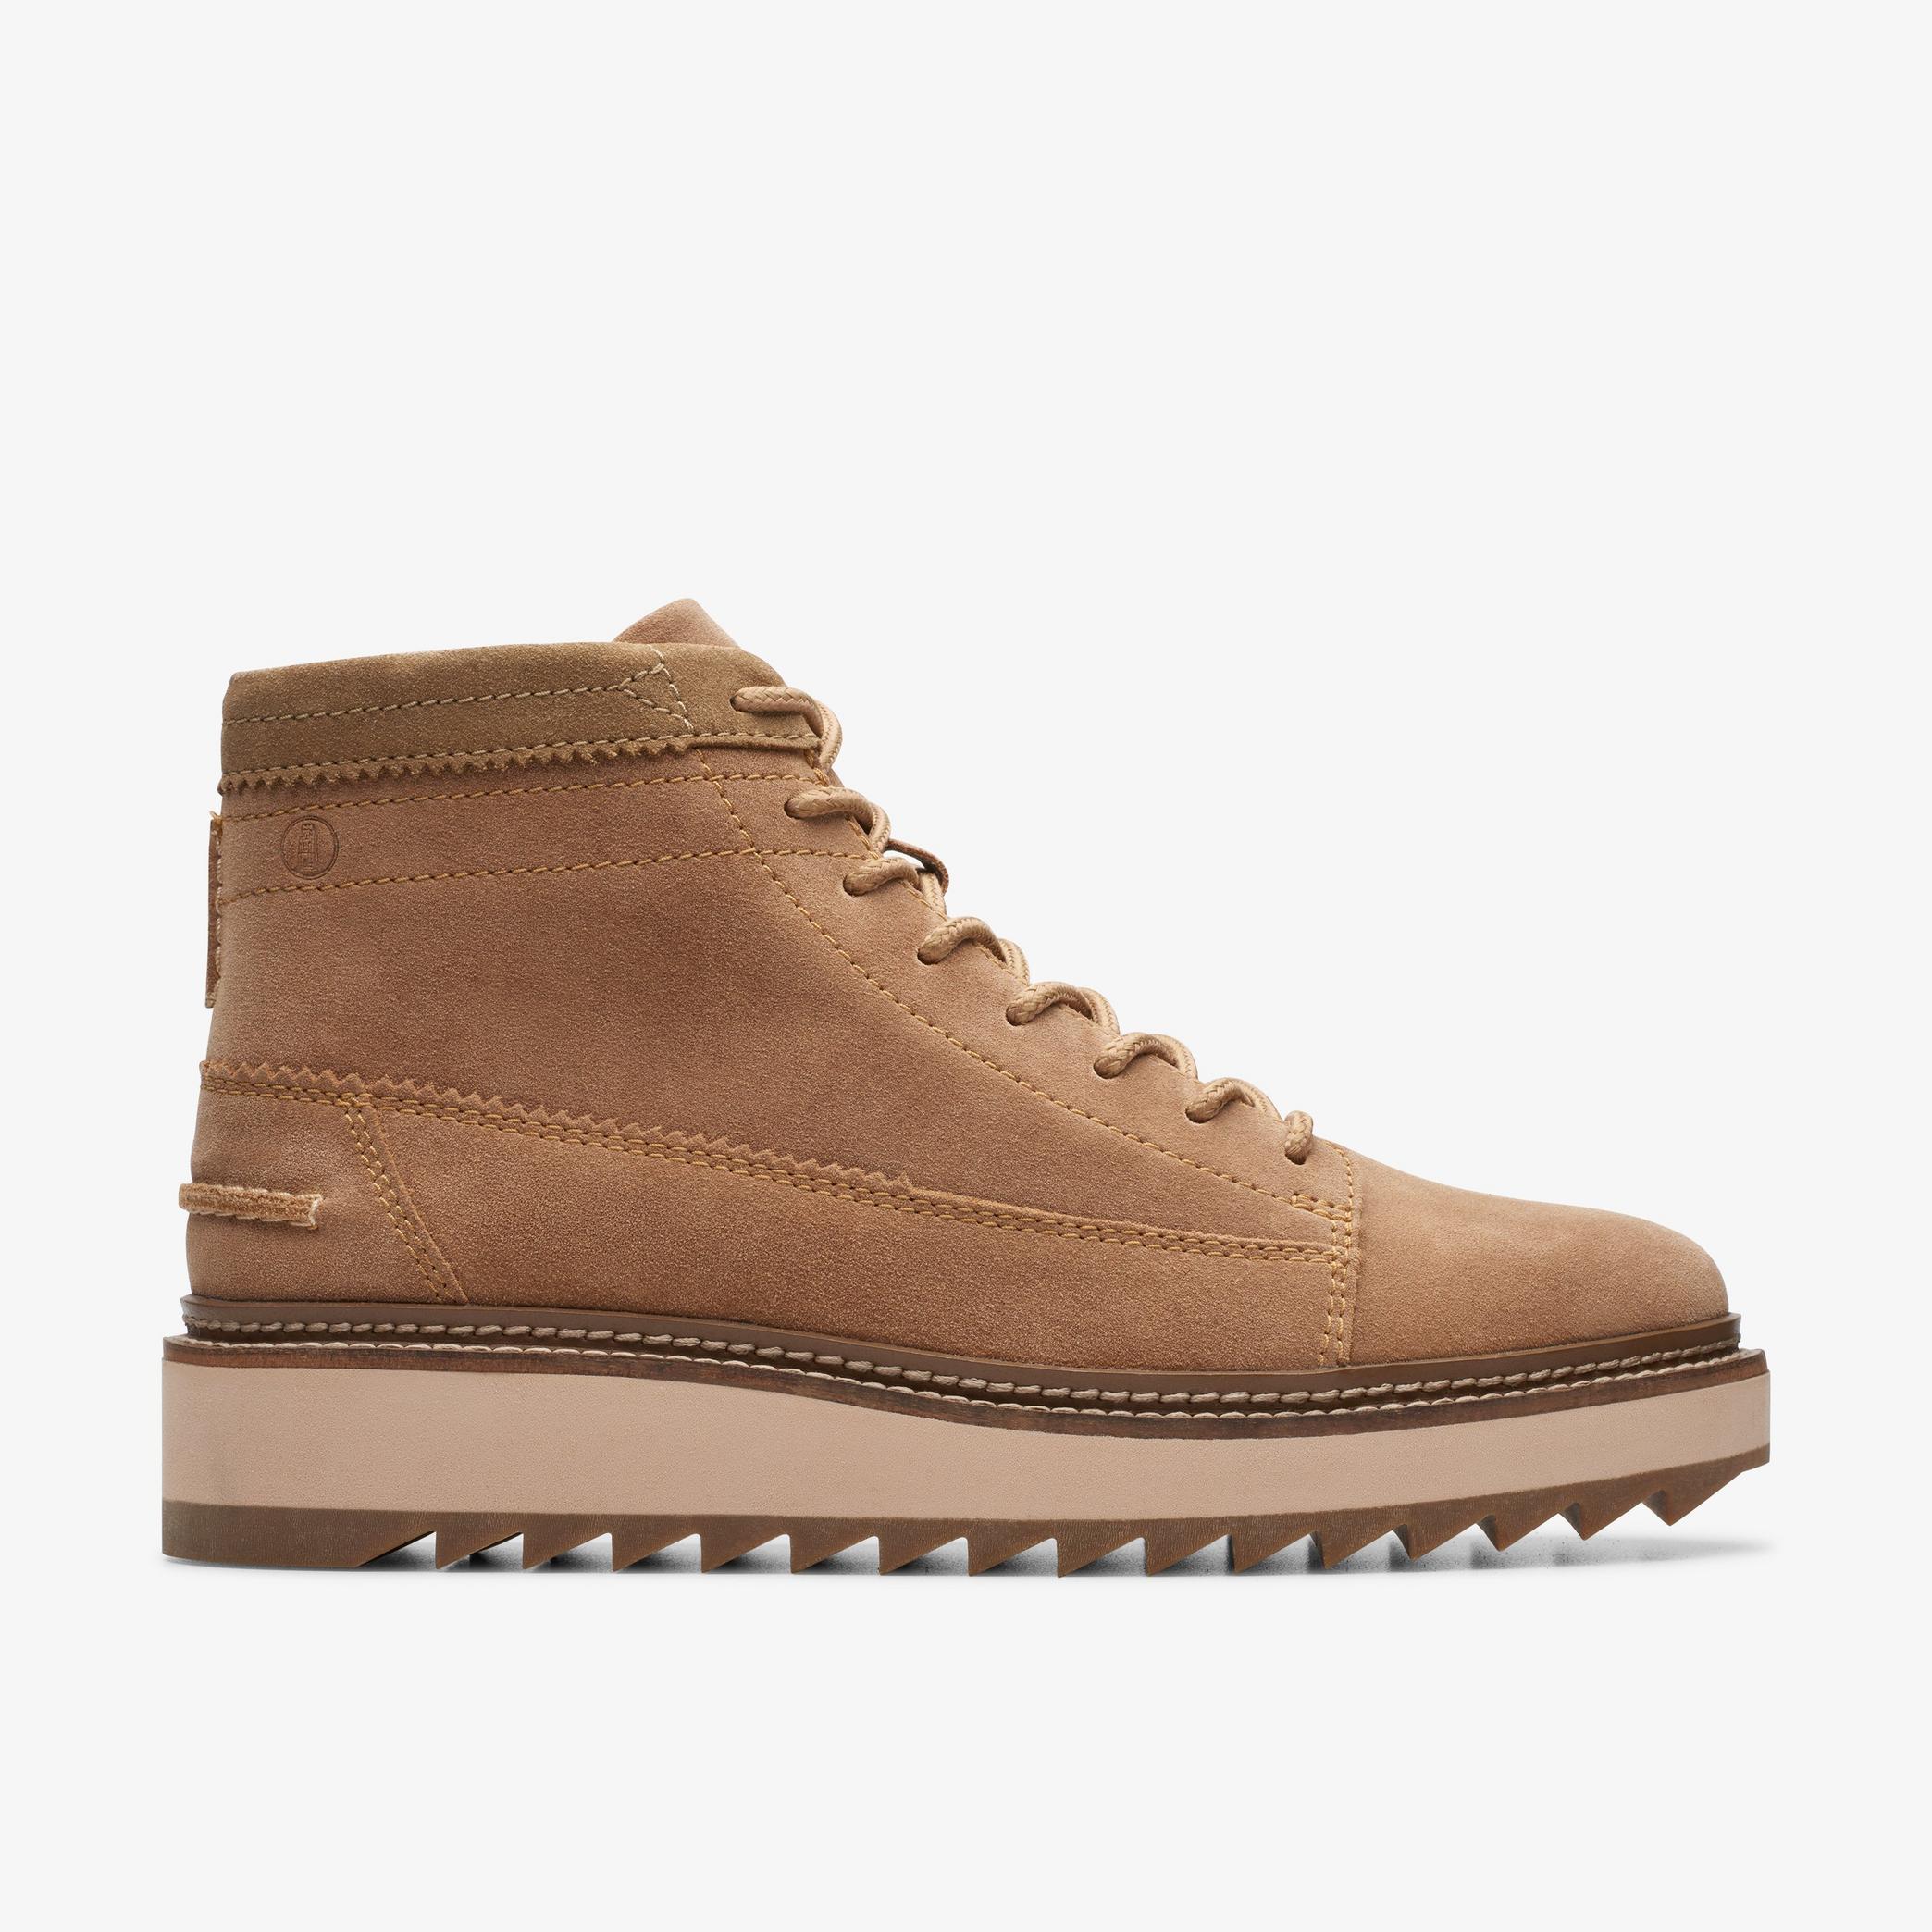 MENS Clarkhill Hi Light Tan Suede Ankle Boots | Clarks CA